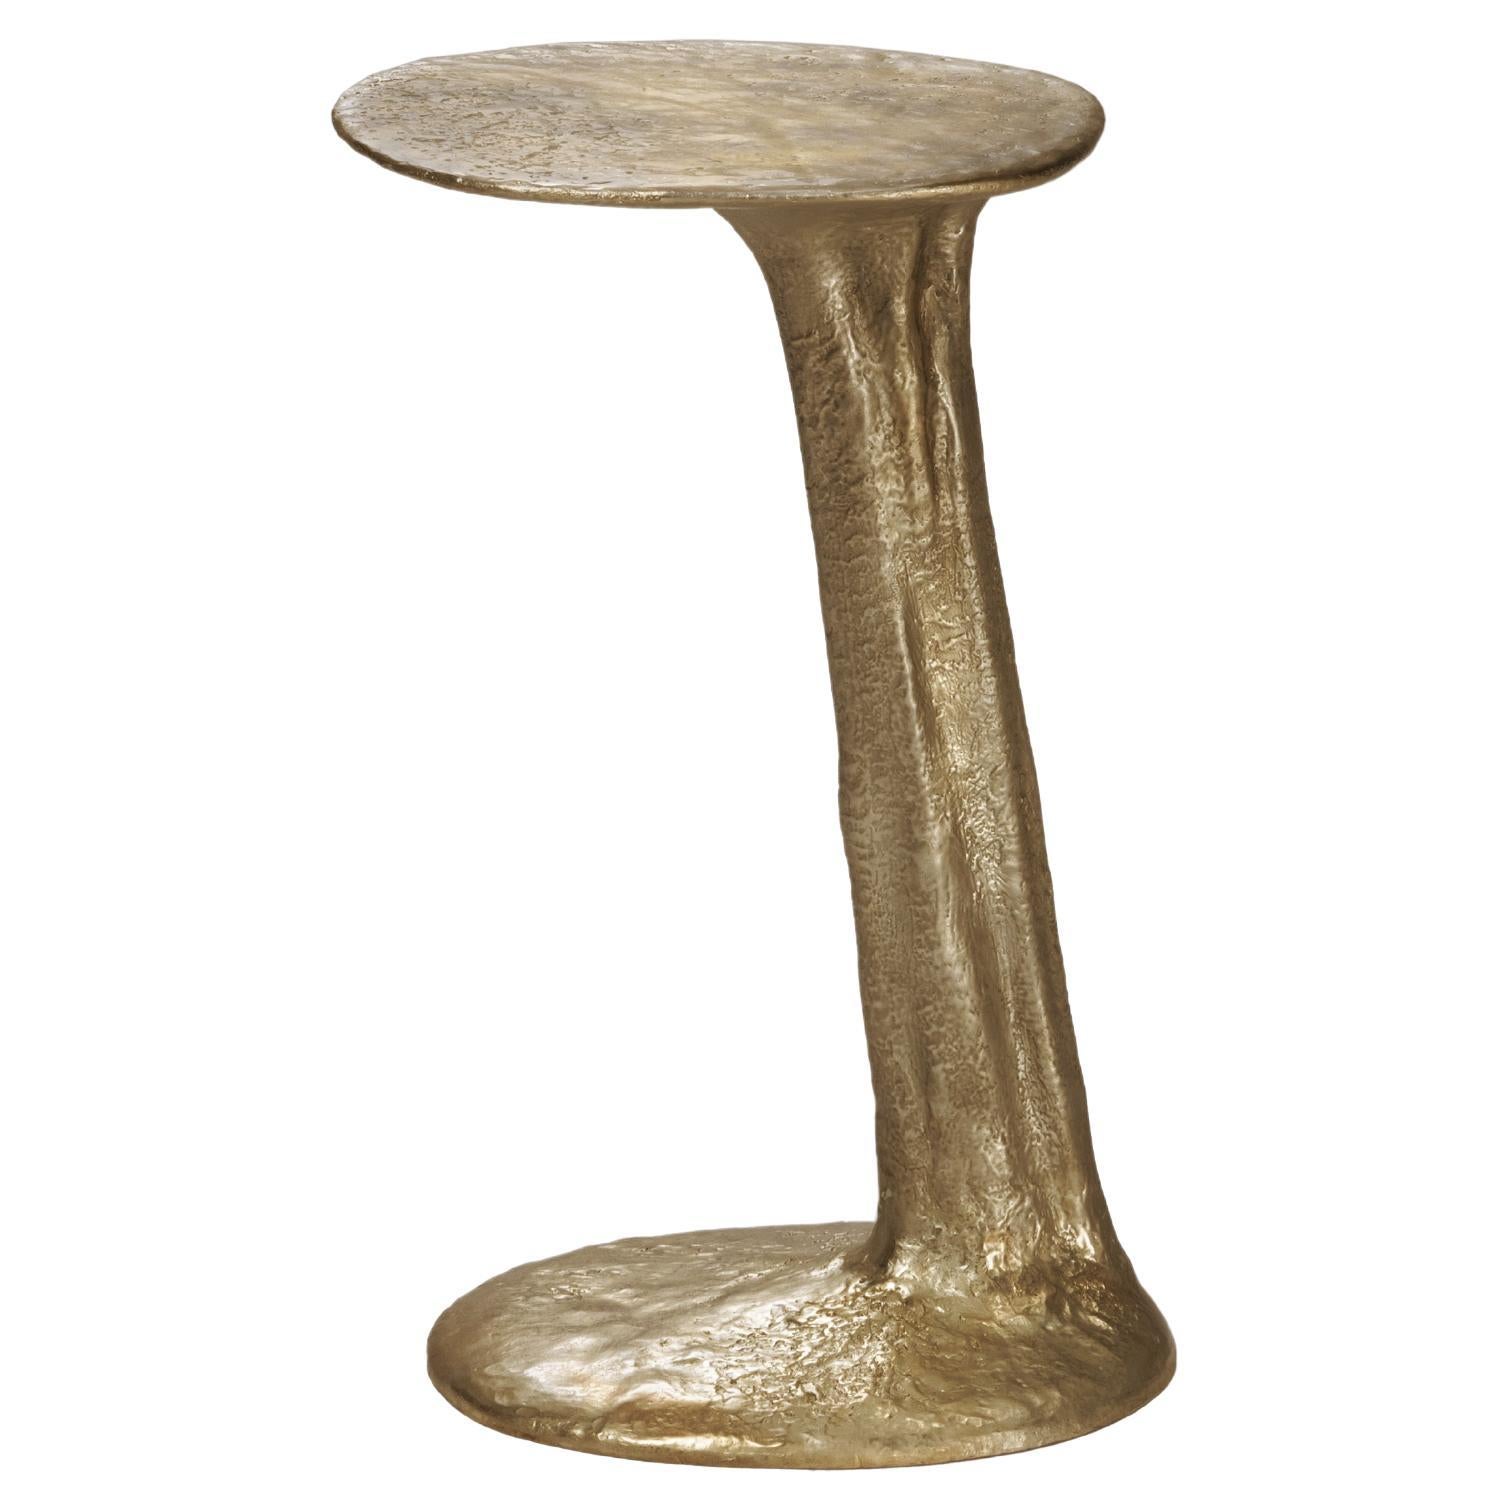 Contemporary Cast Brass Natural The Crack in Chaos Side Table S by Atelier V&F